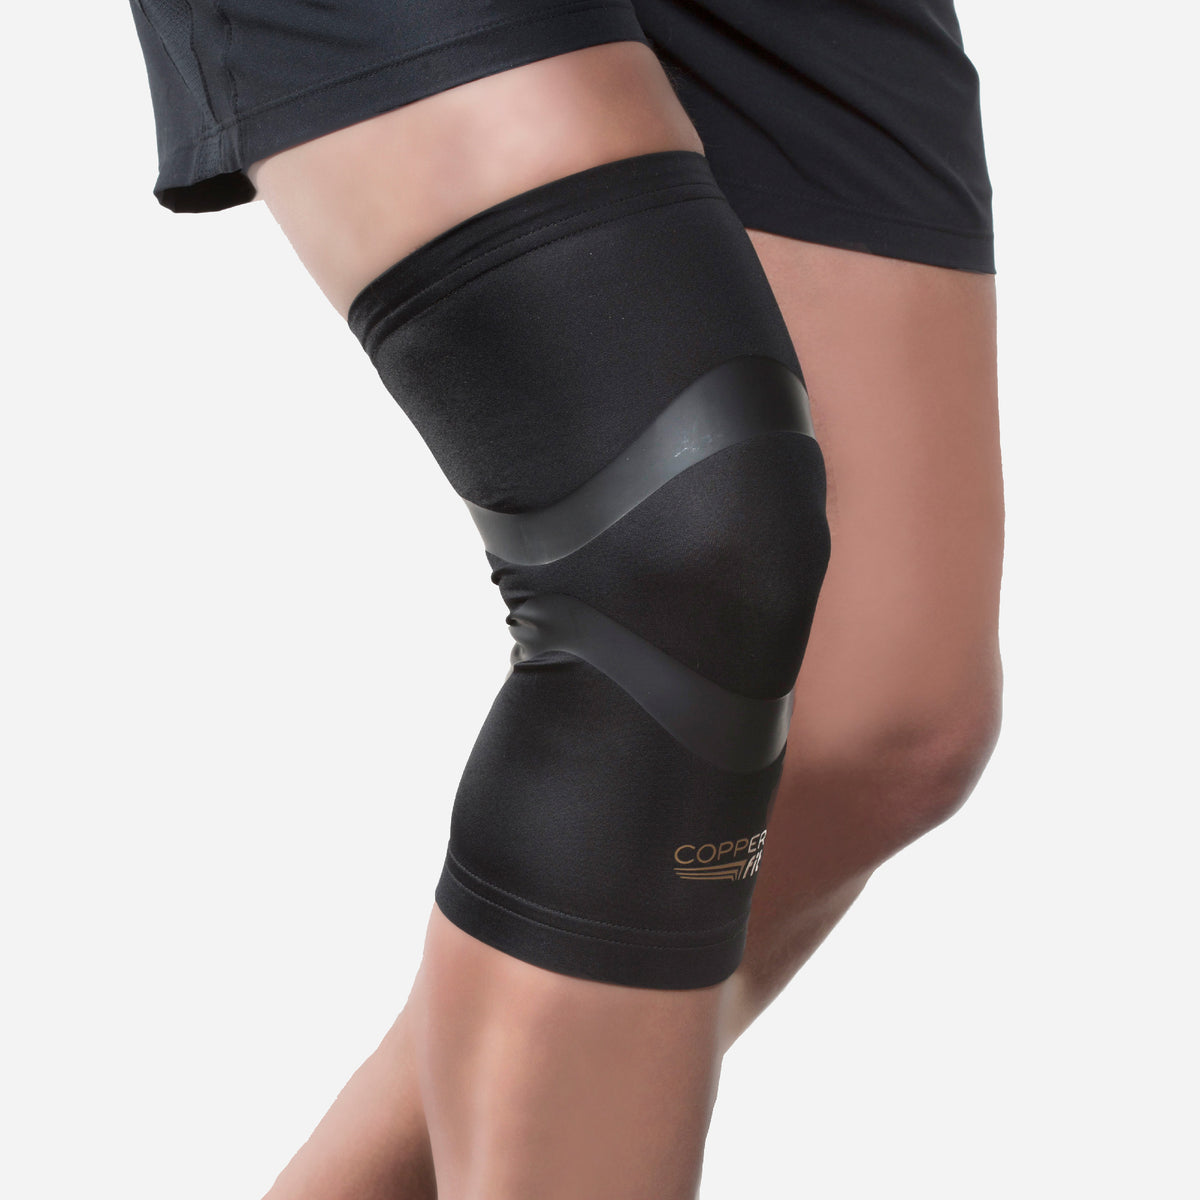  Tommie Copper Pro-Grade Compression Knee Sleeve